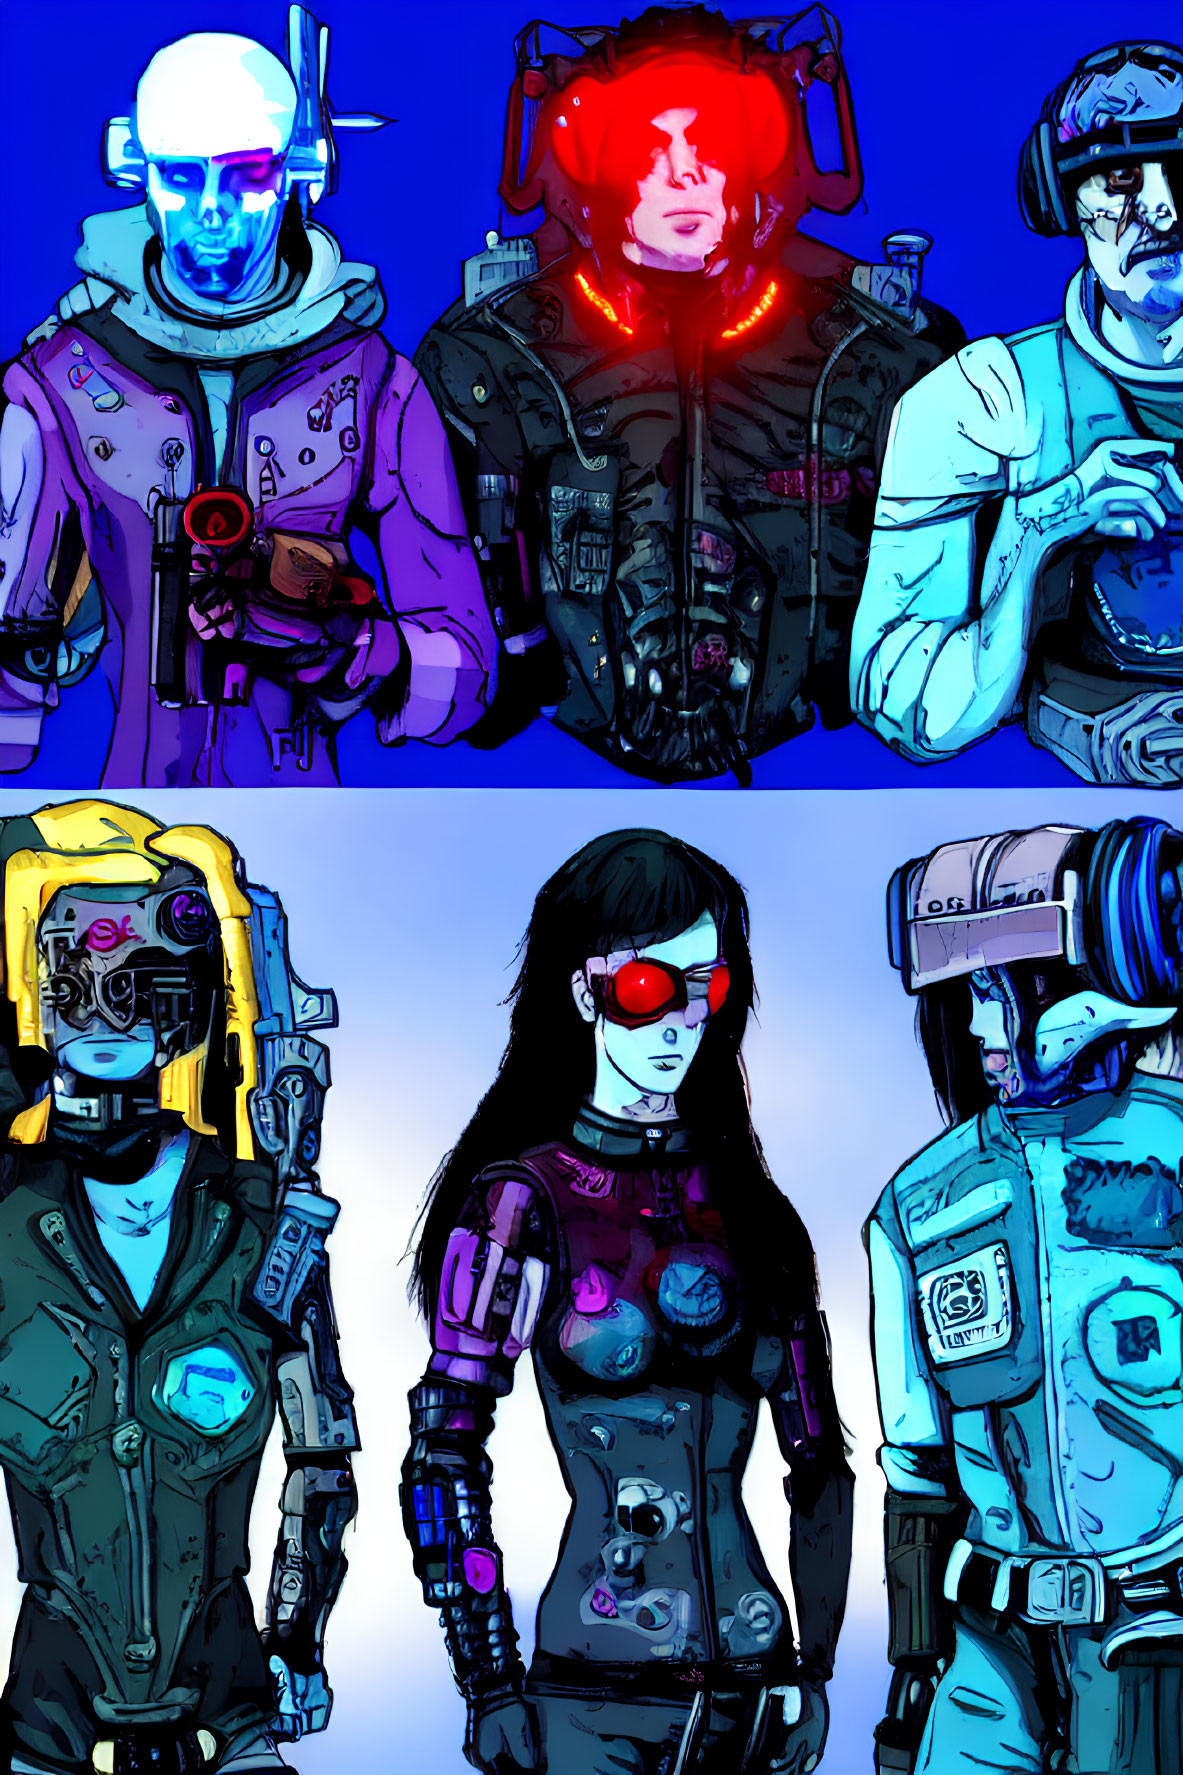 Futuristic stylized characters with cybernetic enhancements on blue backdrop